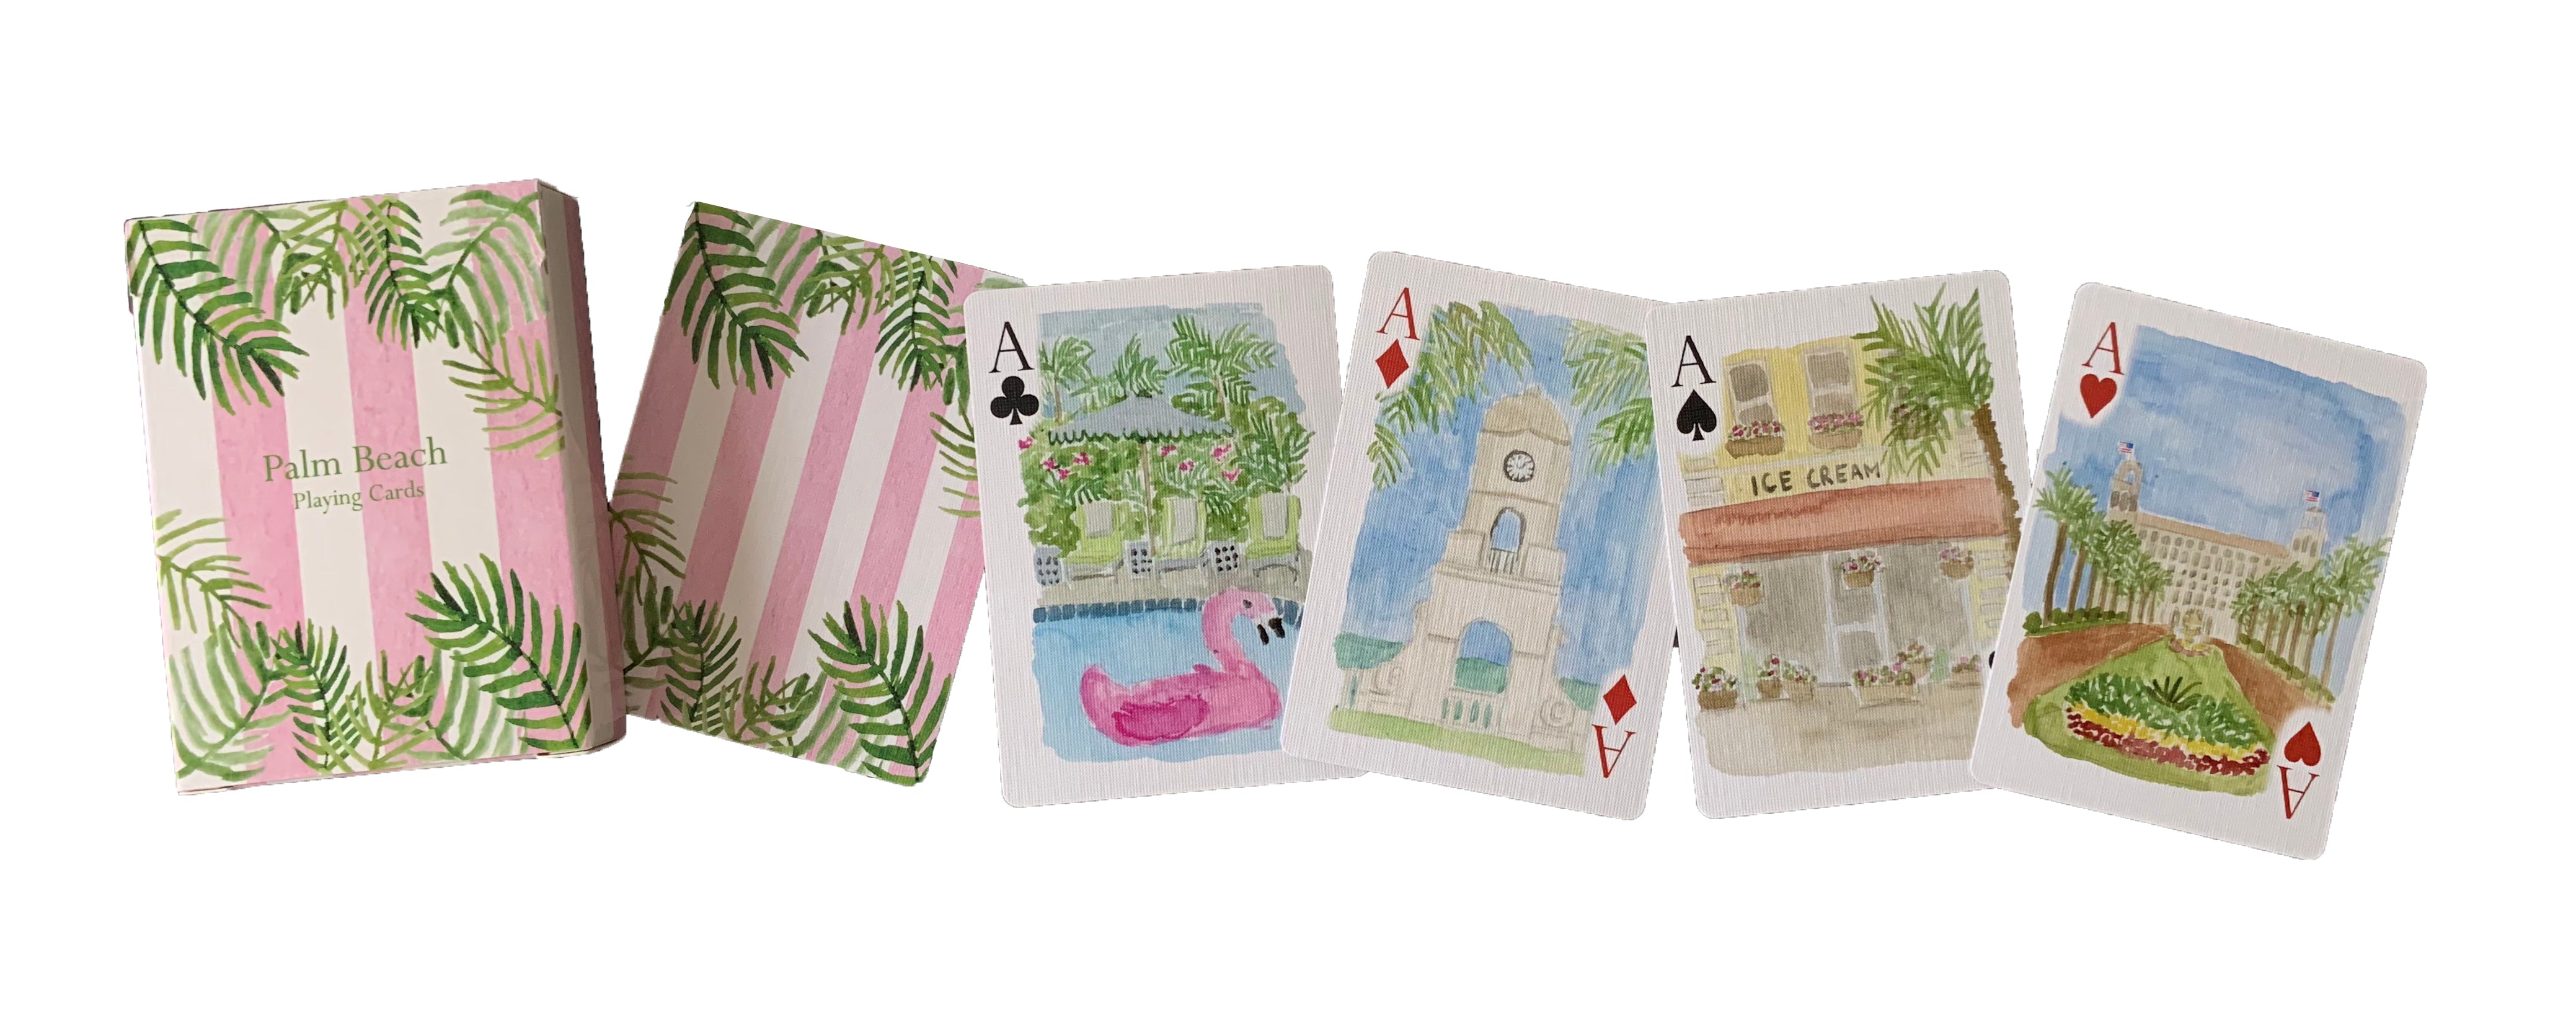 Palm Beach Playing Cards